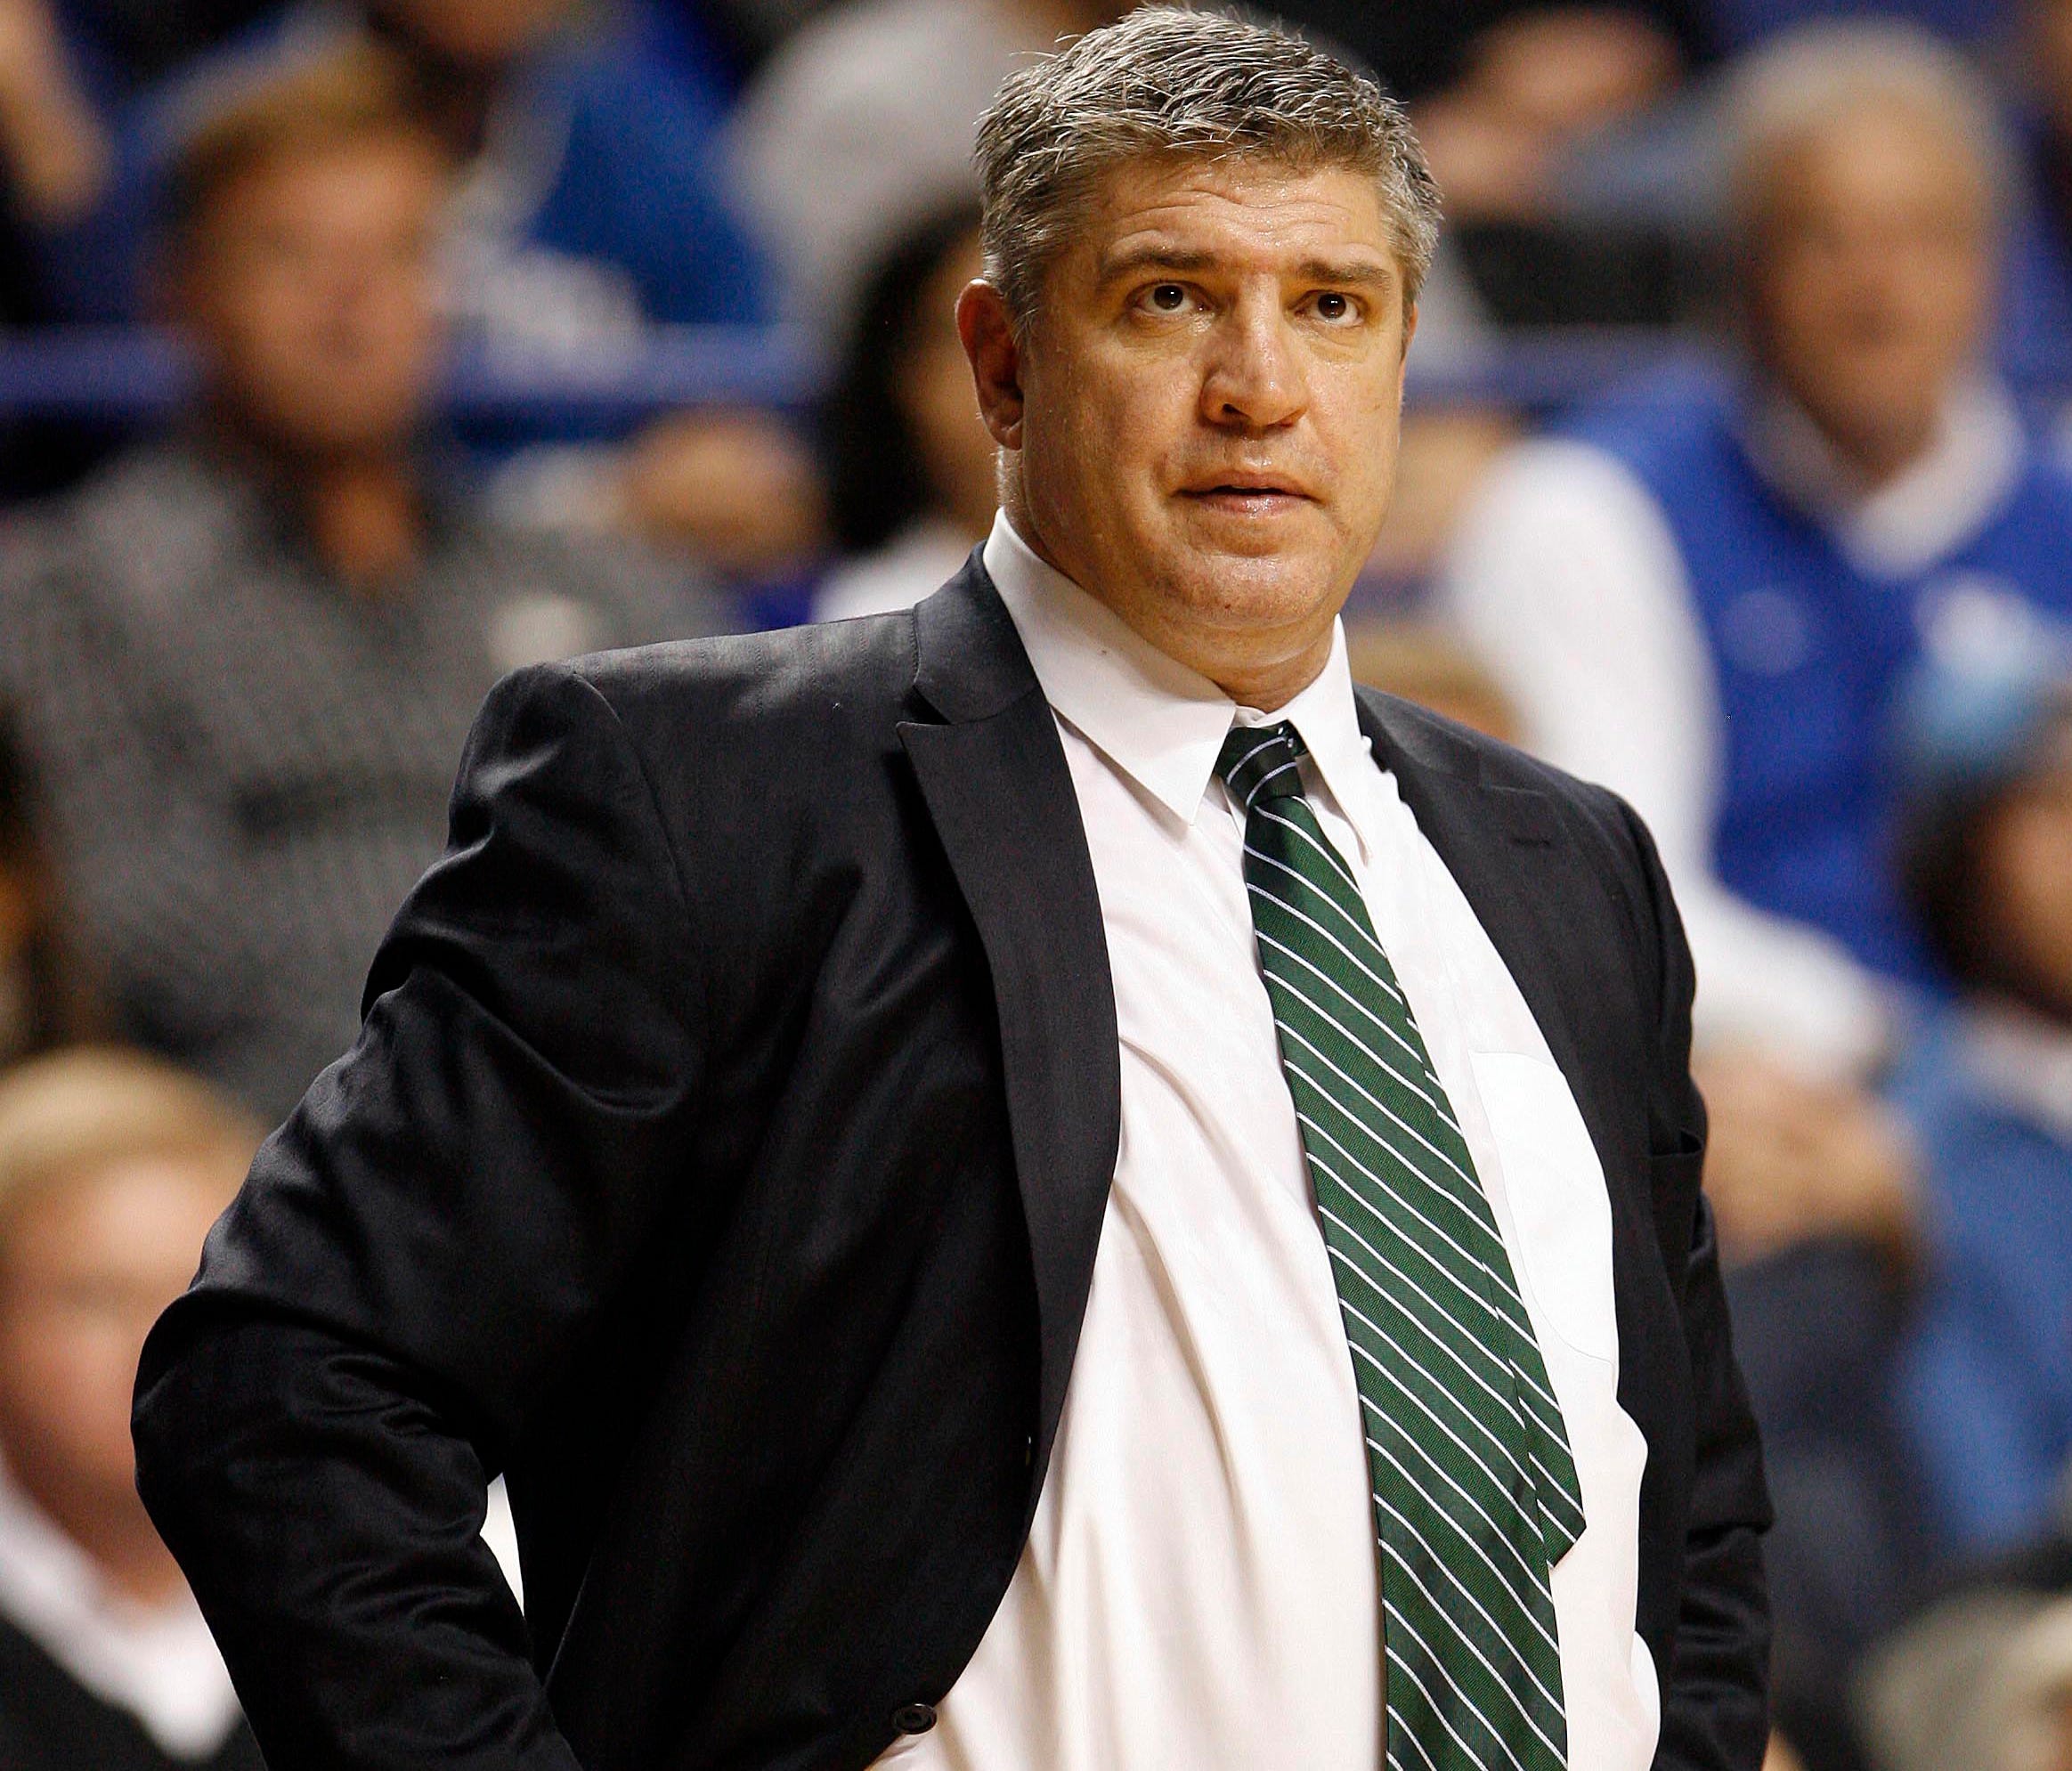 Siena coach, Jimmy Patsos, shown here as the head coach of Loyola (MD), is under investigation for verbal abuse.